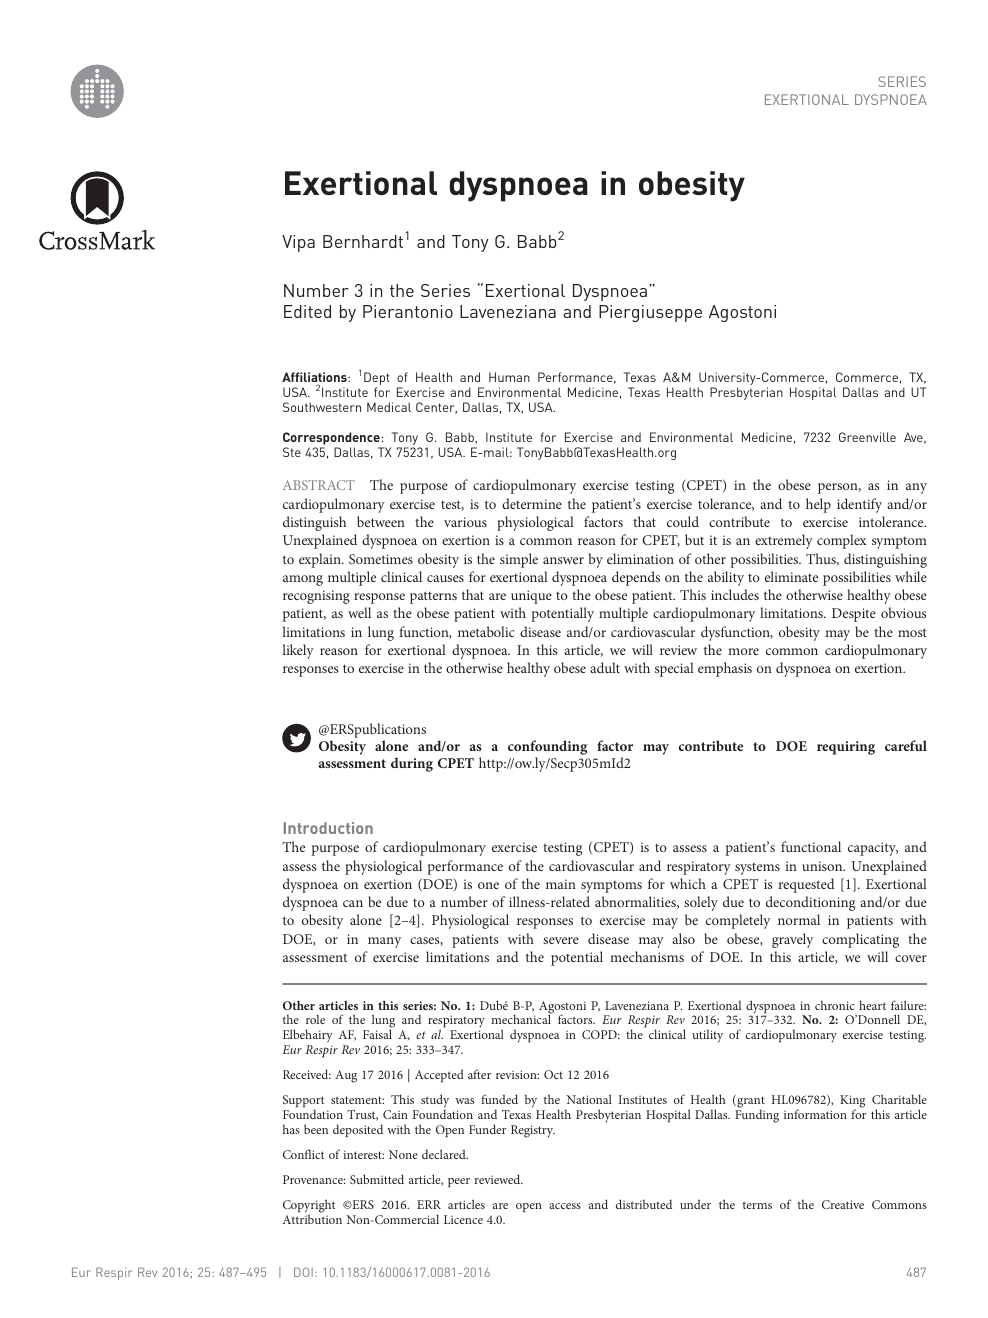 Exertional Dyspnoea In Obesity Topic Of Research Paper In Medical Engineering Download Scholarly Article Pdf And Read For Free On Cyberleninka Open Science Hub